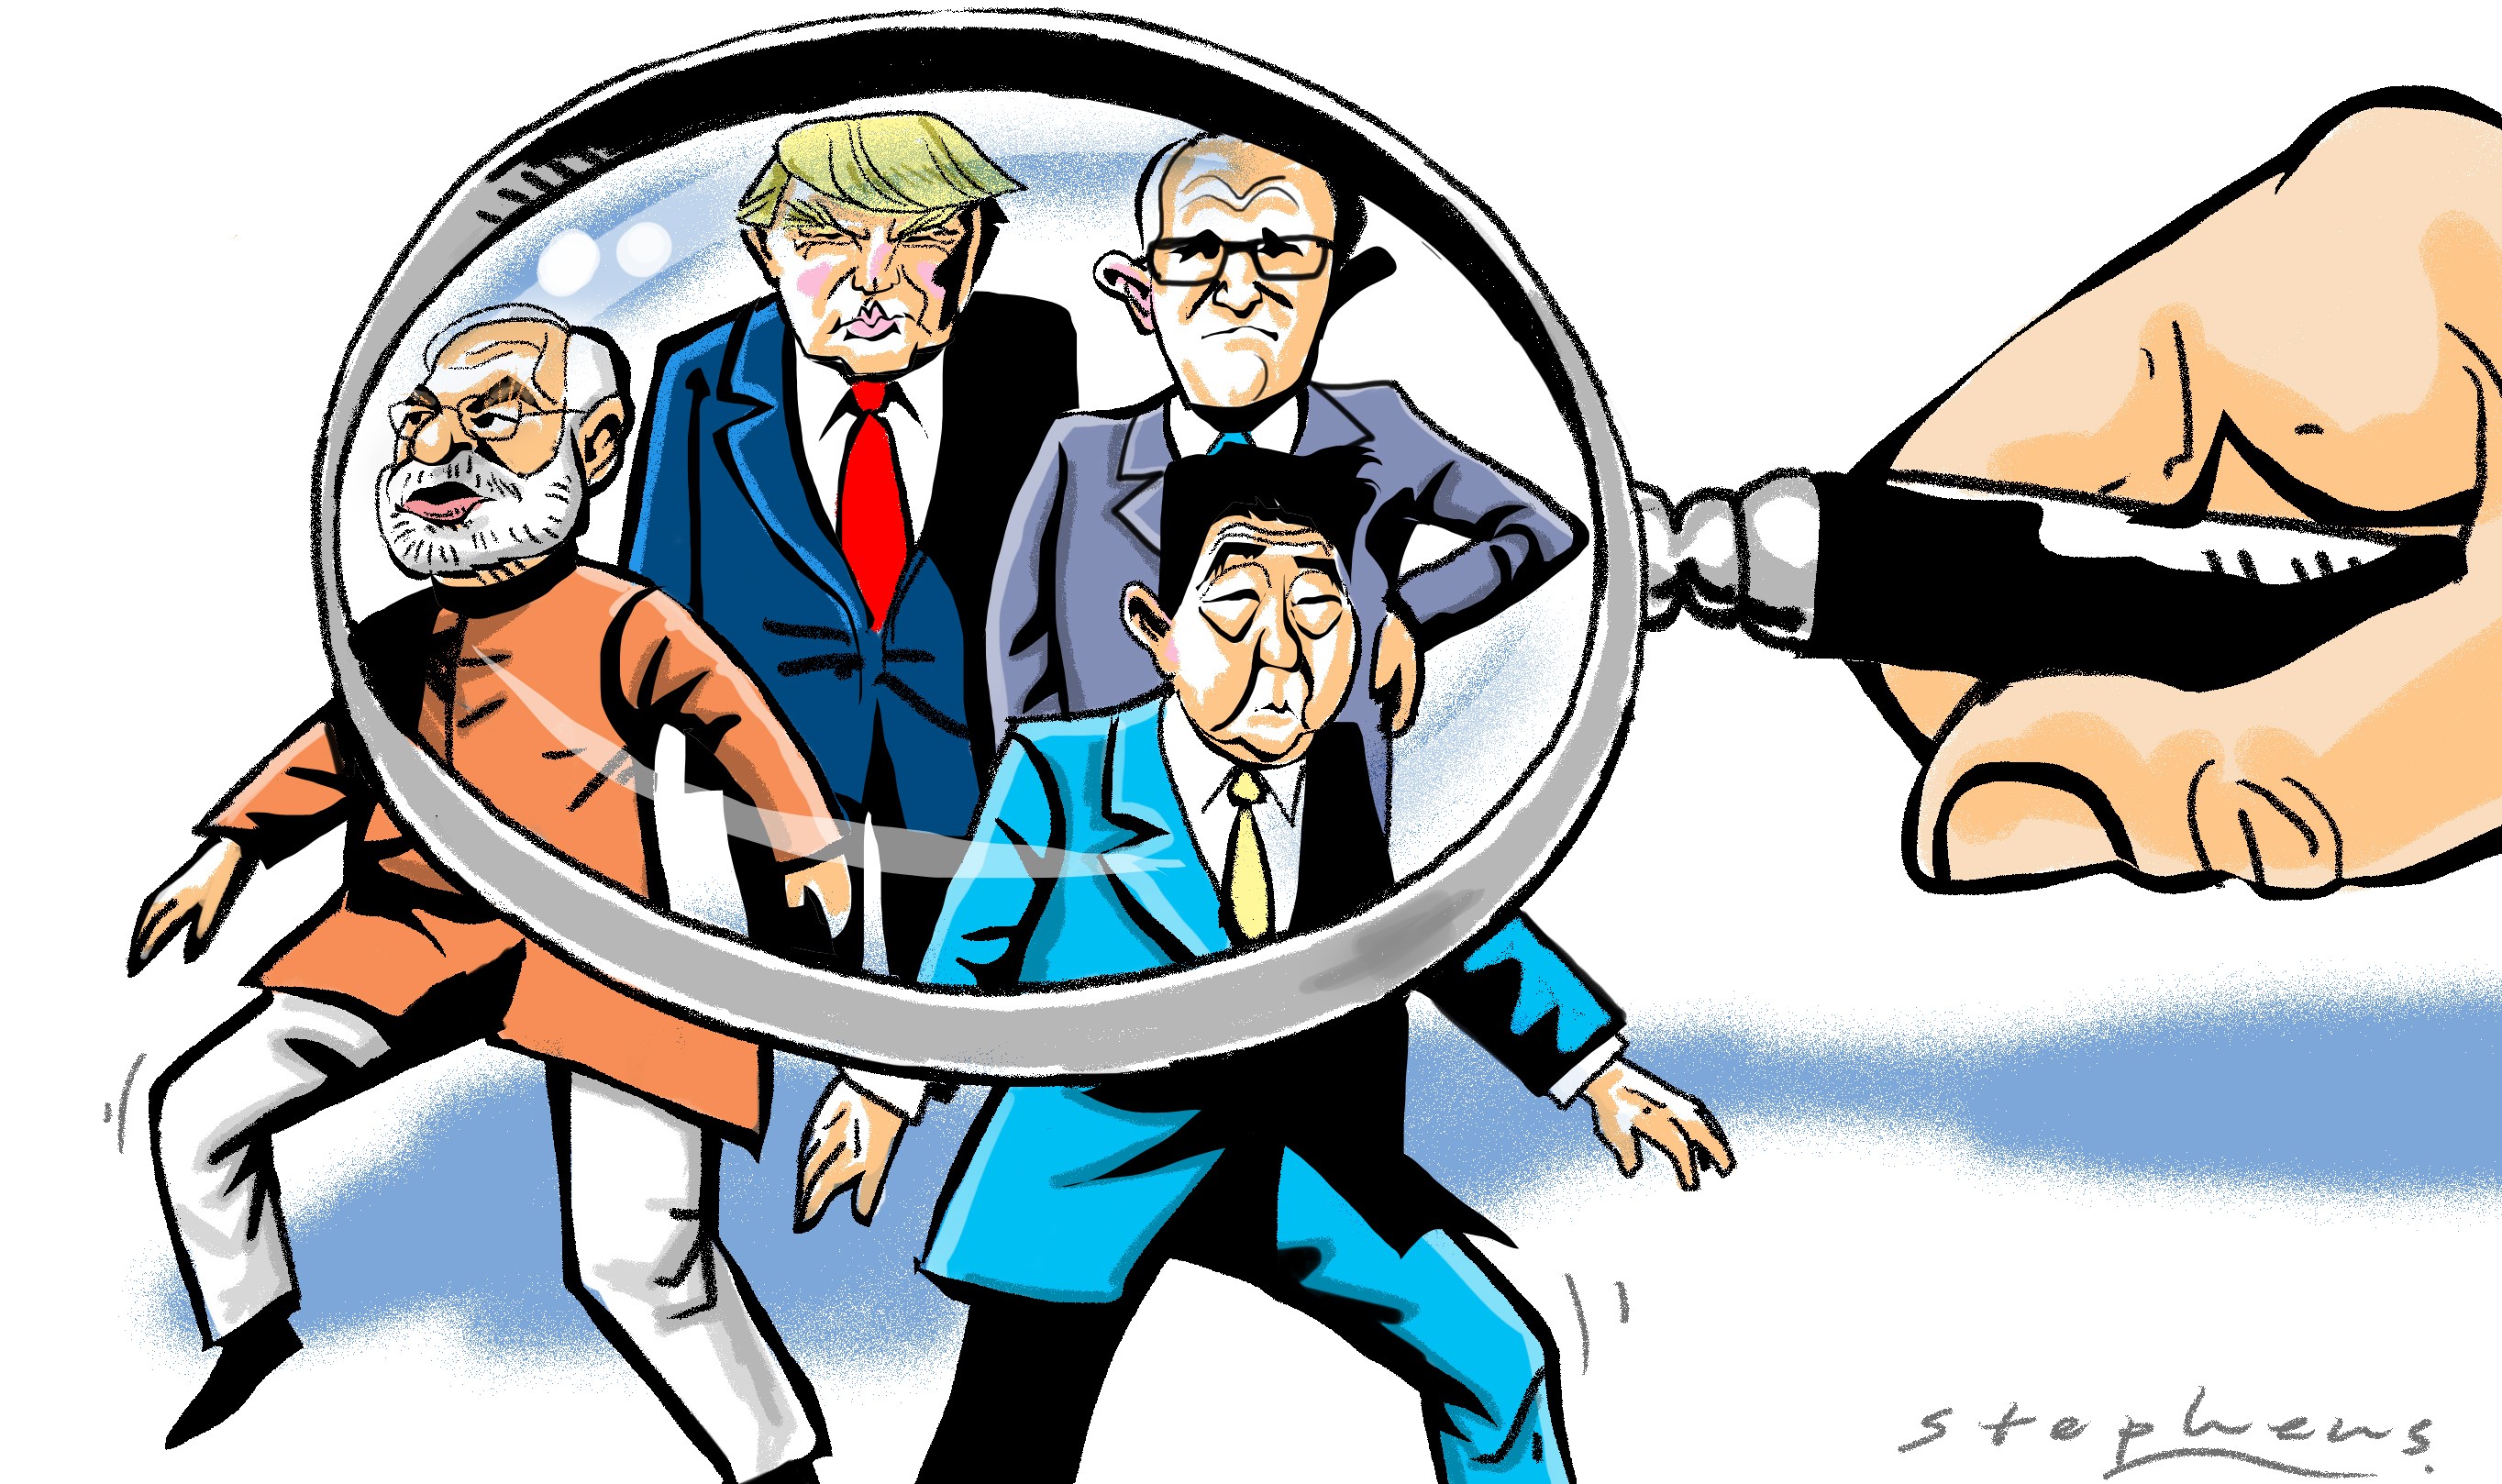 Both India and Japan are now vigorously pursuing their bilateral relationships with China, unrestrained by the anti-China messaging implicit in the formation of the Quad. Illustration: Craig Stephens